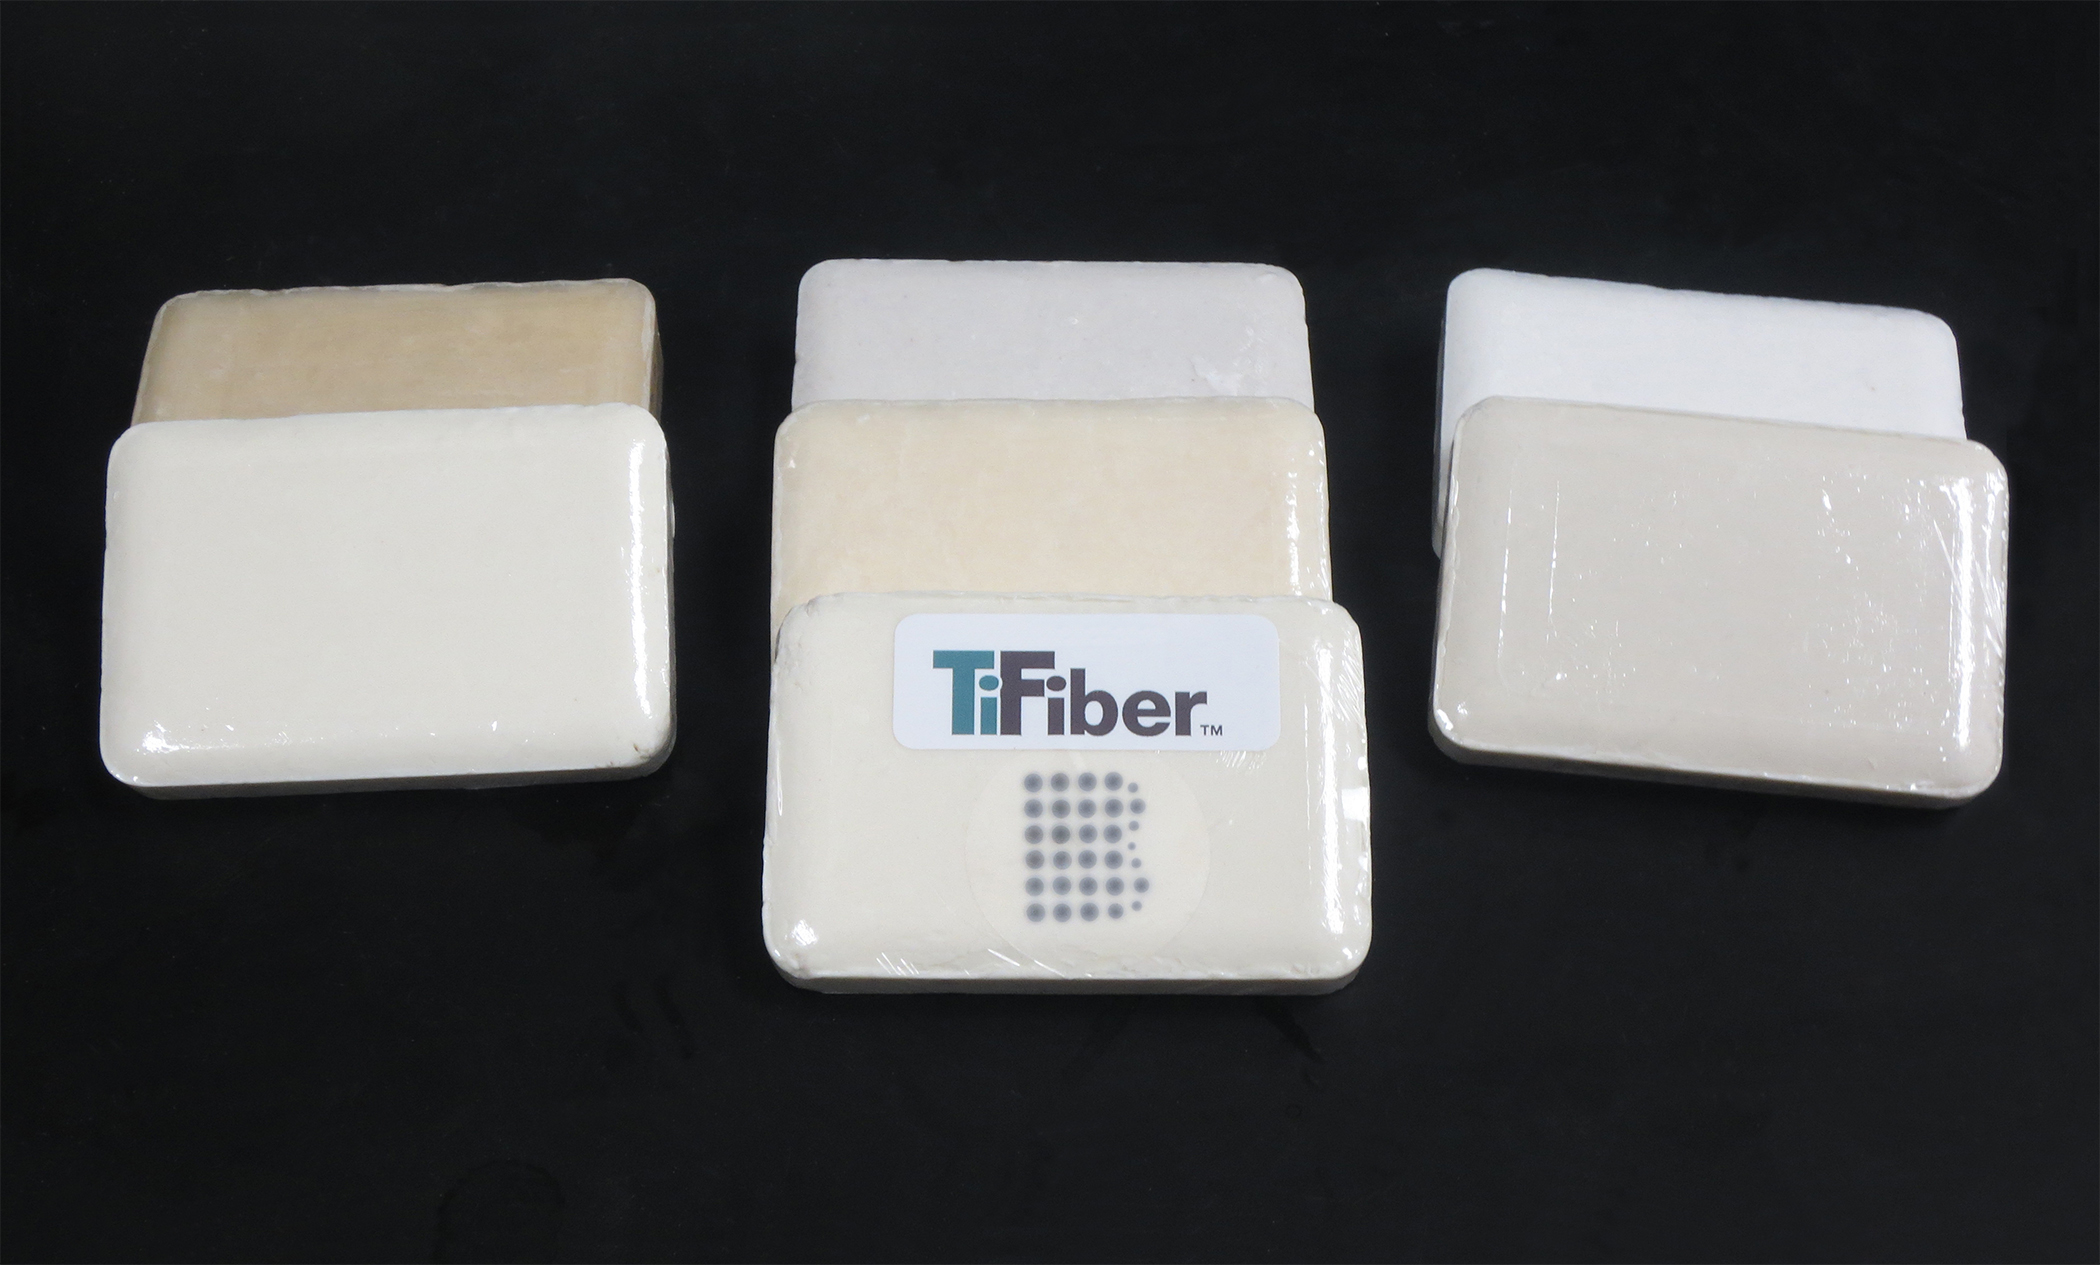 Pictured are several of bars of soap created jointly by Bradford Soap Works and TiFiber to be used in testing.  TiFiber is further developing antimicrobial technology that is safe and effective.